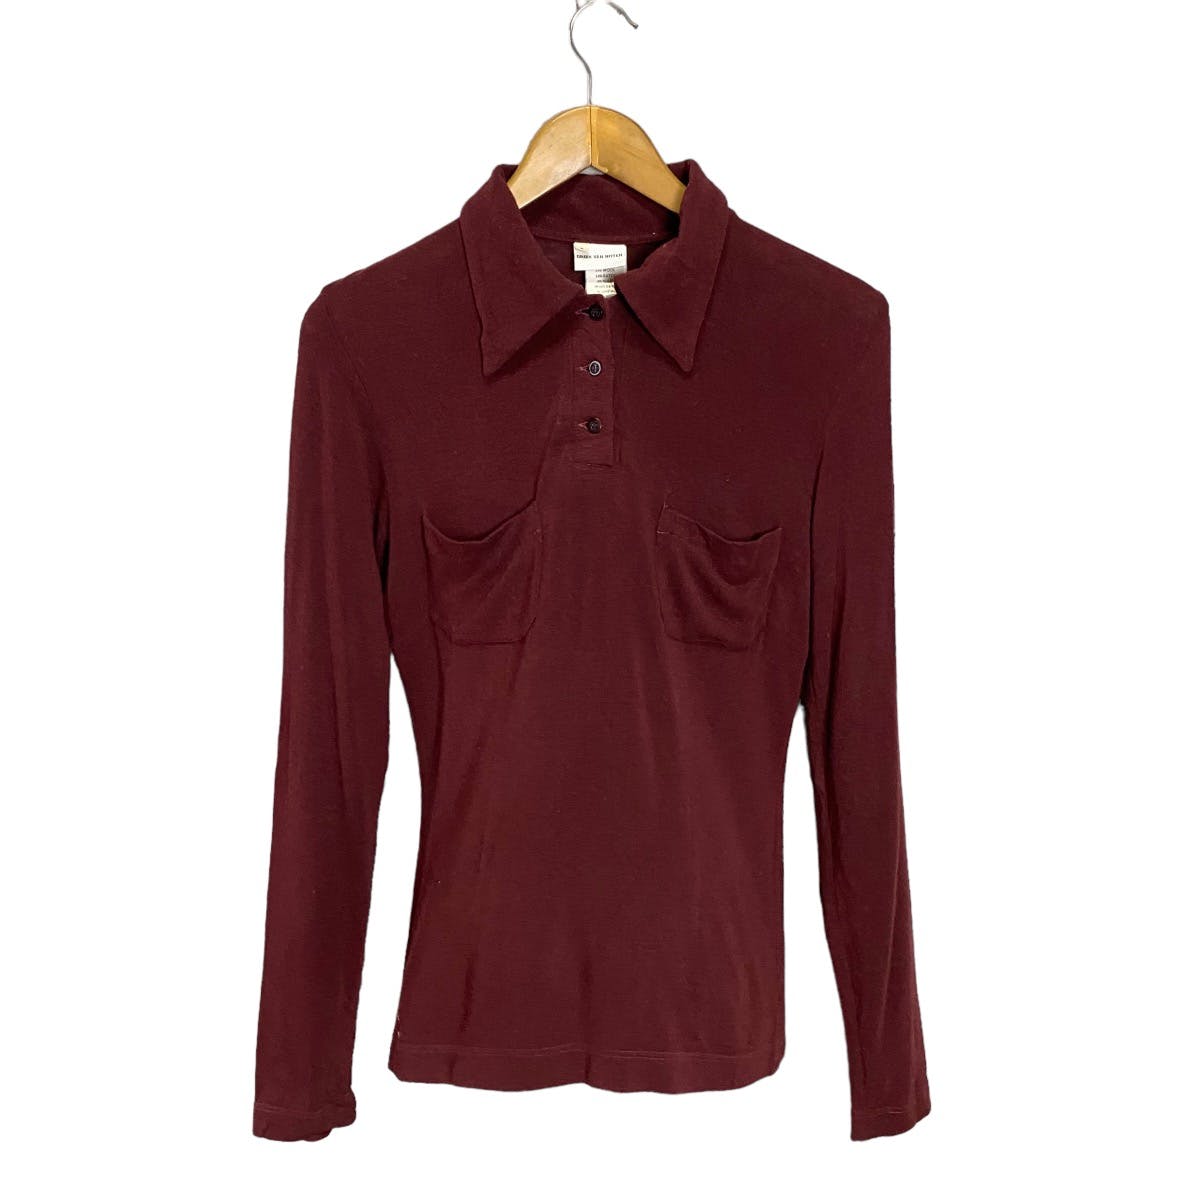 Dries Van Noten polos stretchable double pocket - 1